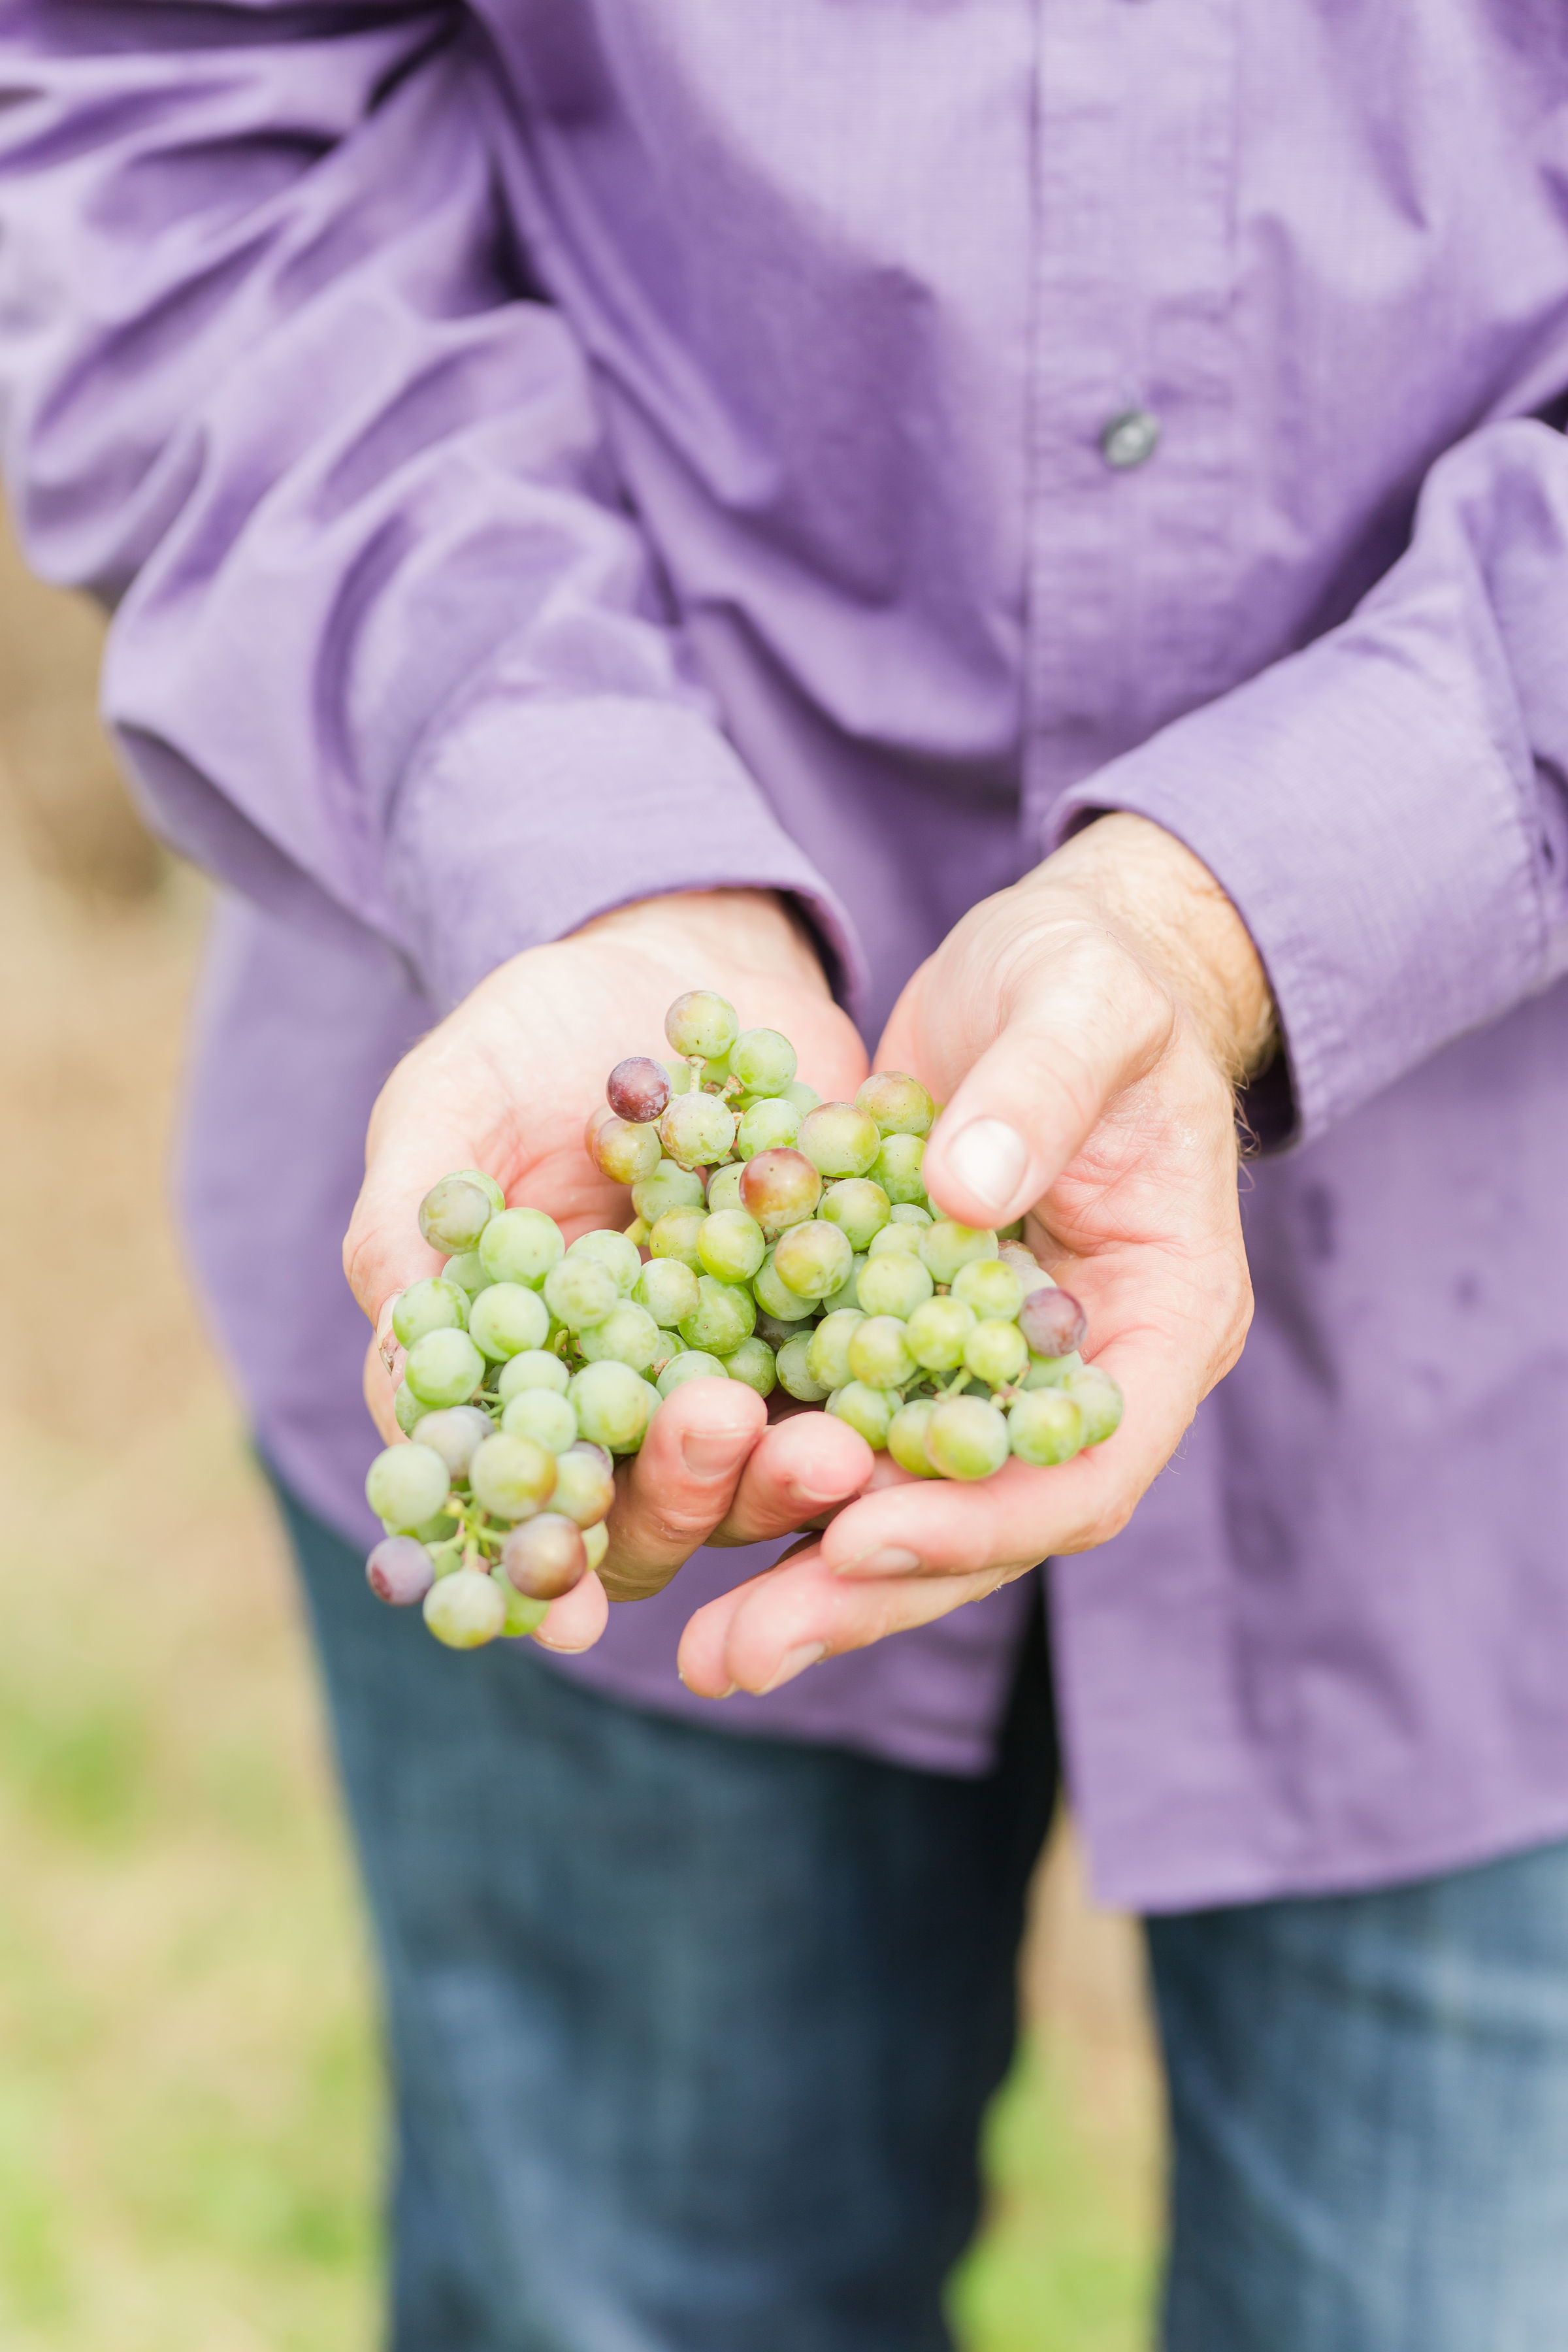 Adam Puchta Winery- A person holding a bundle of ripe green grapes.